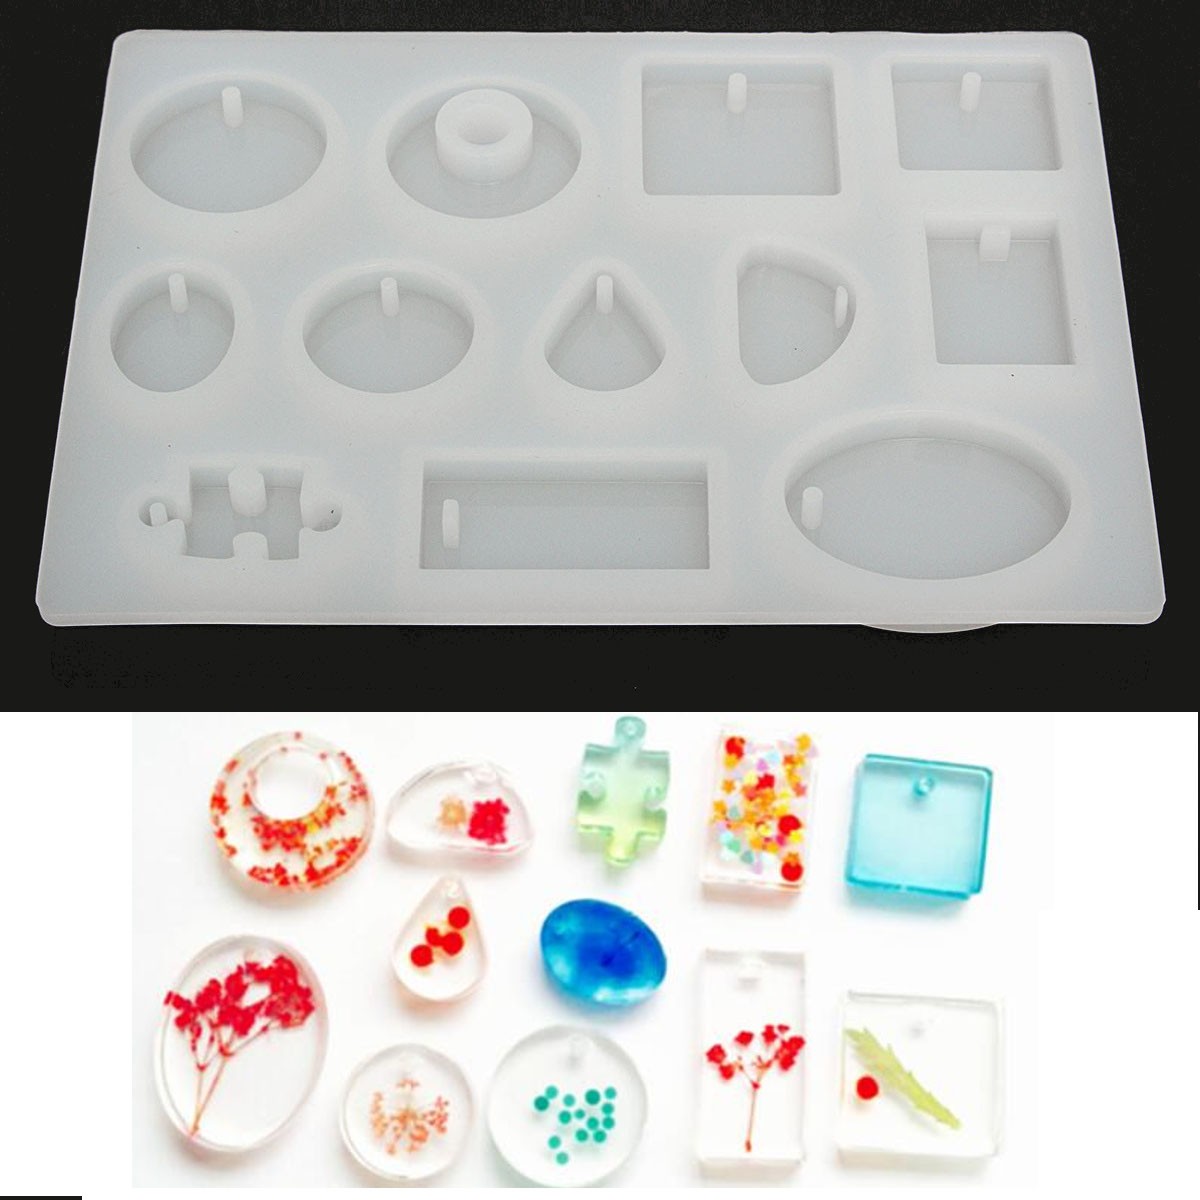 12-Models-Silicone-Mold-Mould-Resin-DIY-Pendant-Jewelry-Tools-Accessories-1080964